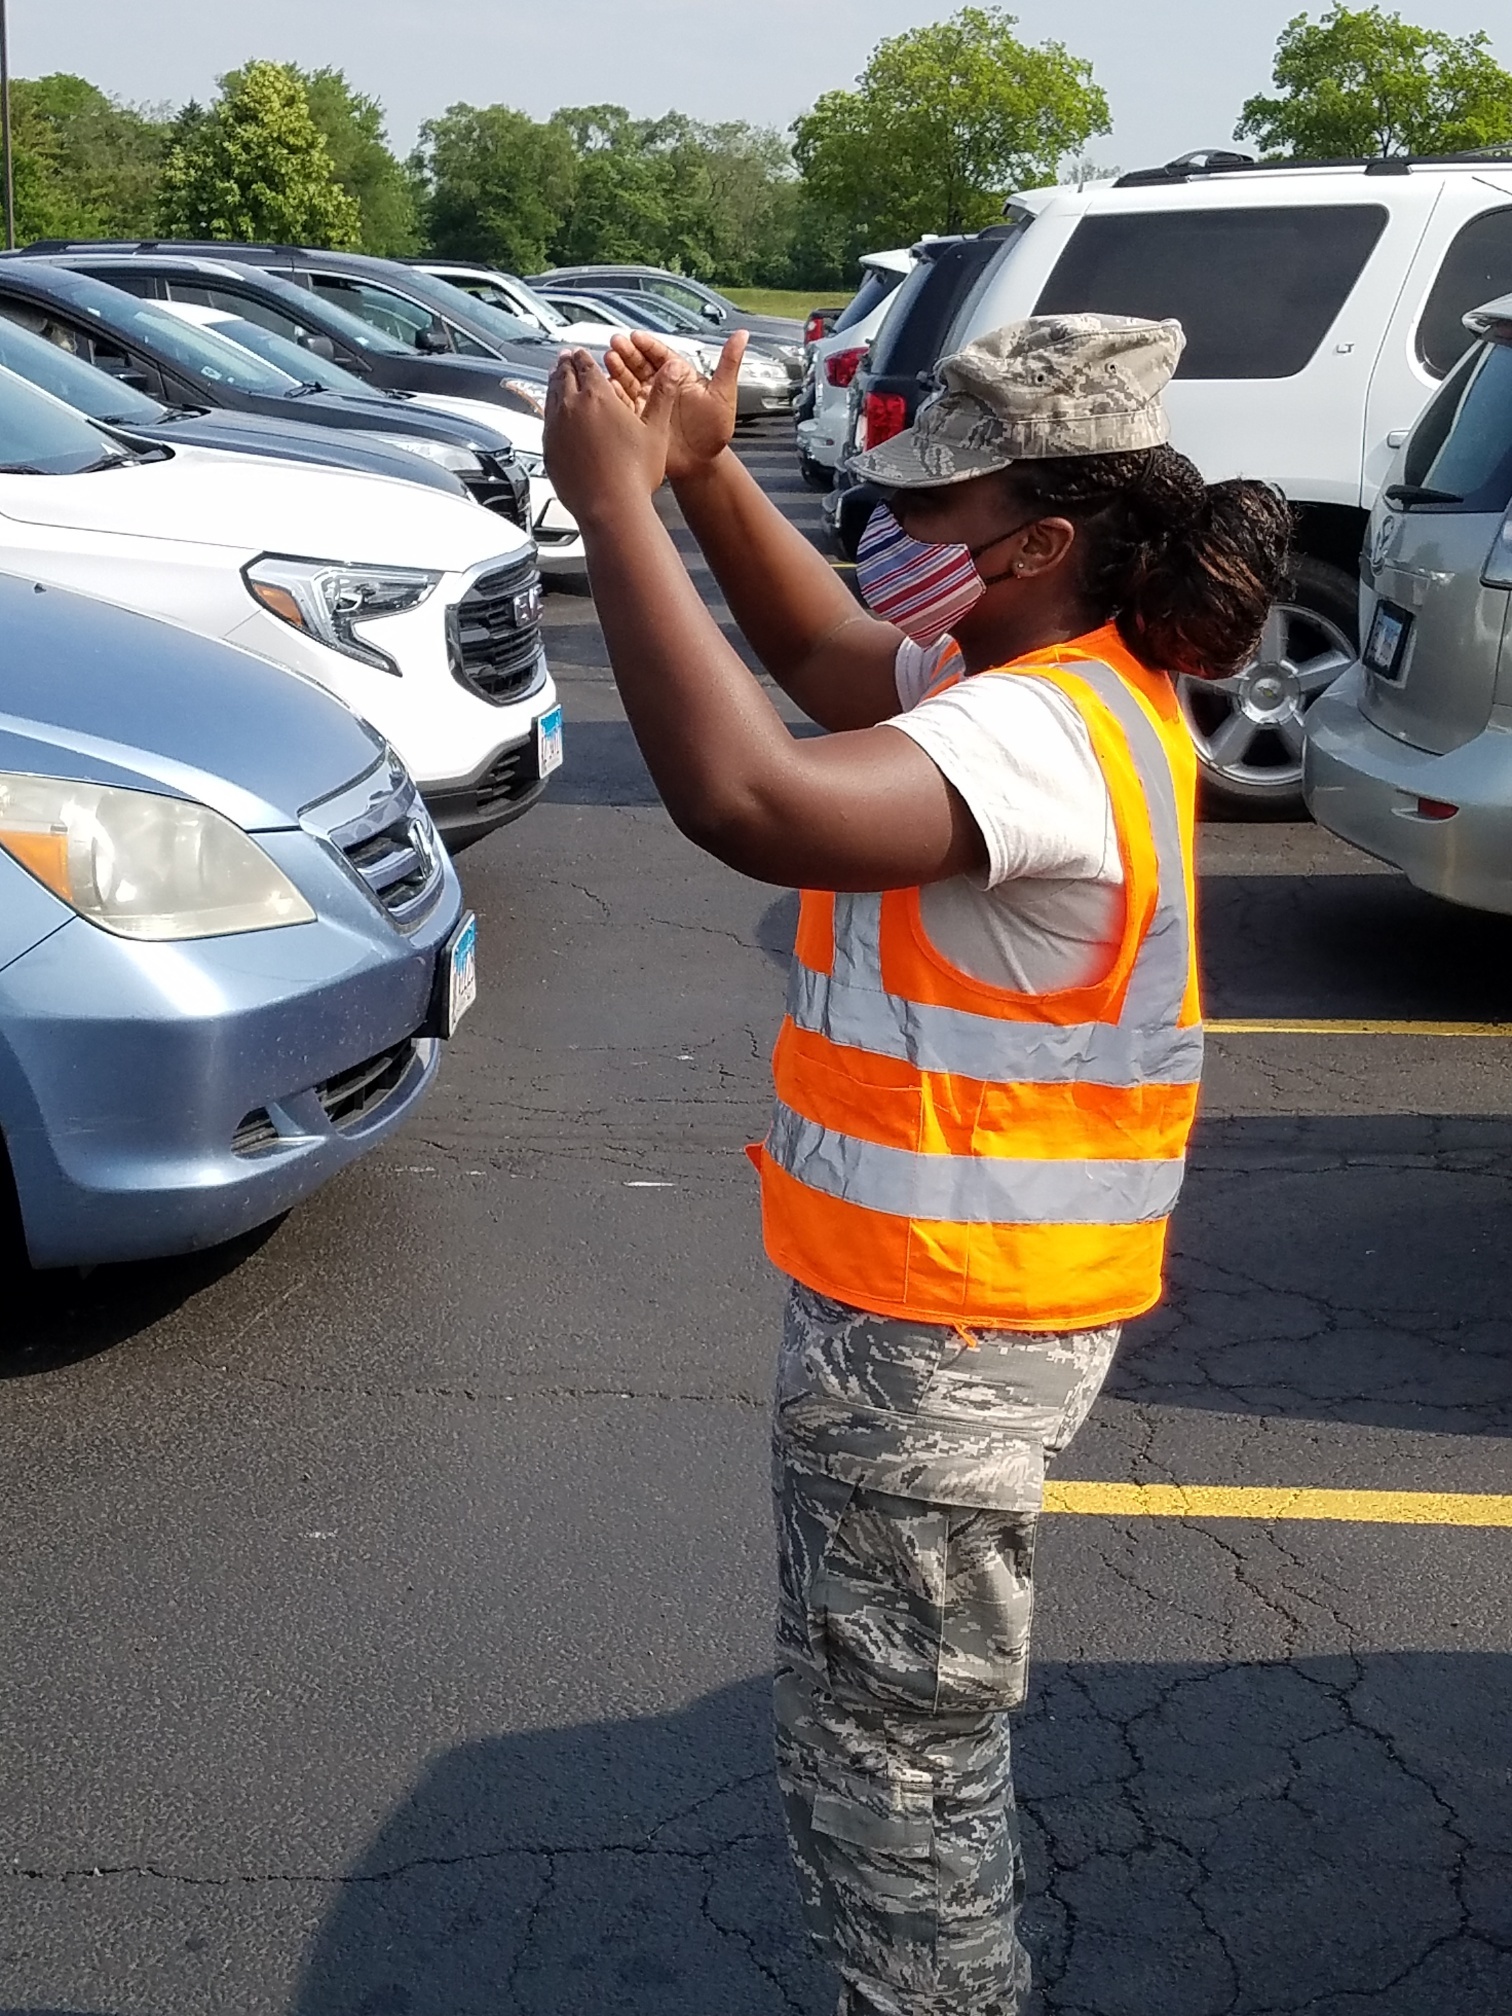 C/1st Lt. Lyonsford assisting with traffic management. Photo credit: Lt Col Gary Gross, Col Shorty Powers Composite Squadron